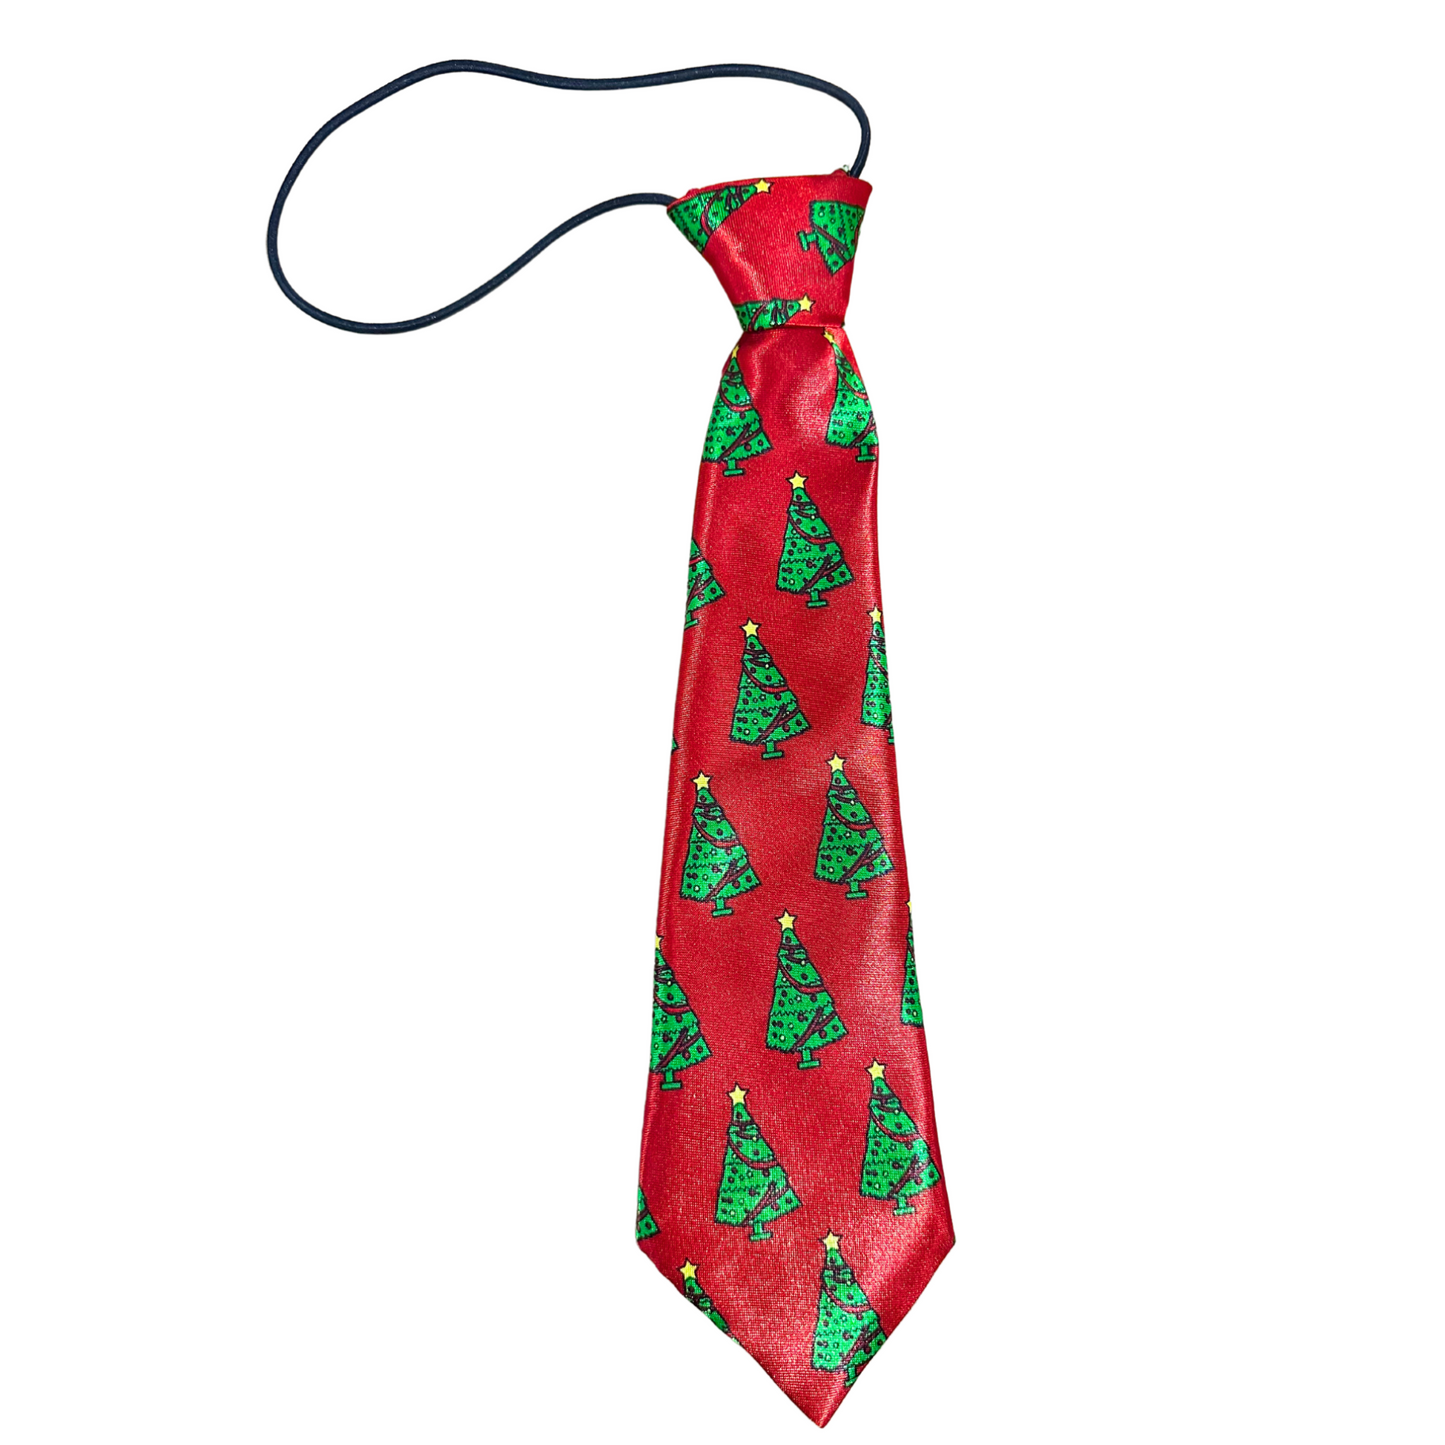 Silky Elastic Business Tie  | Large Dogs | Christmas Green and Red Stripes